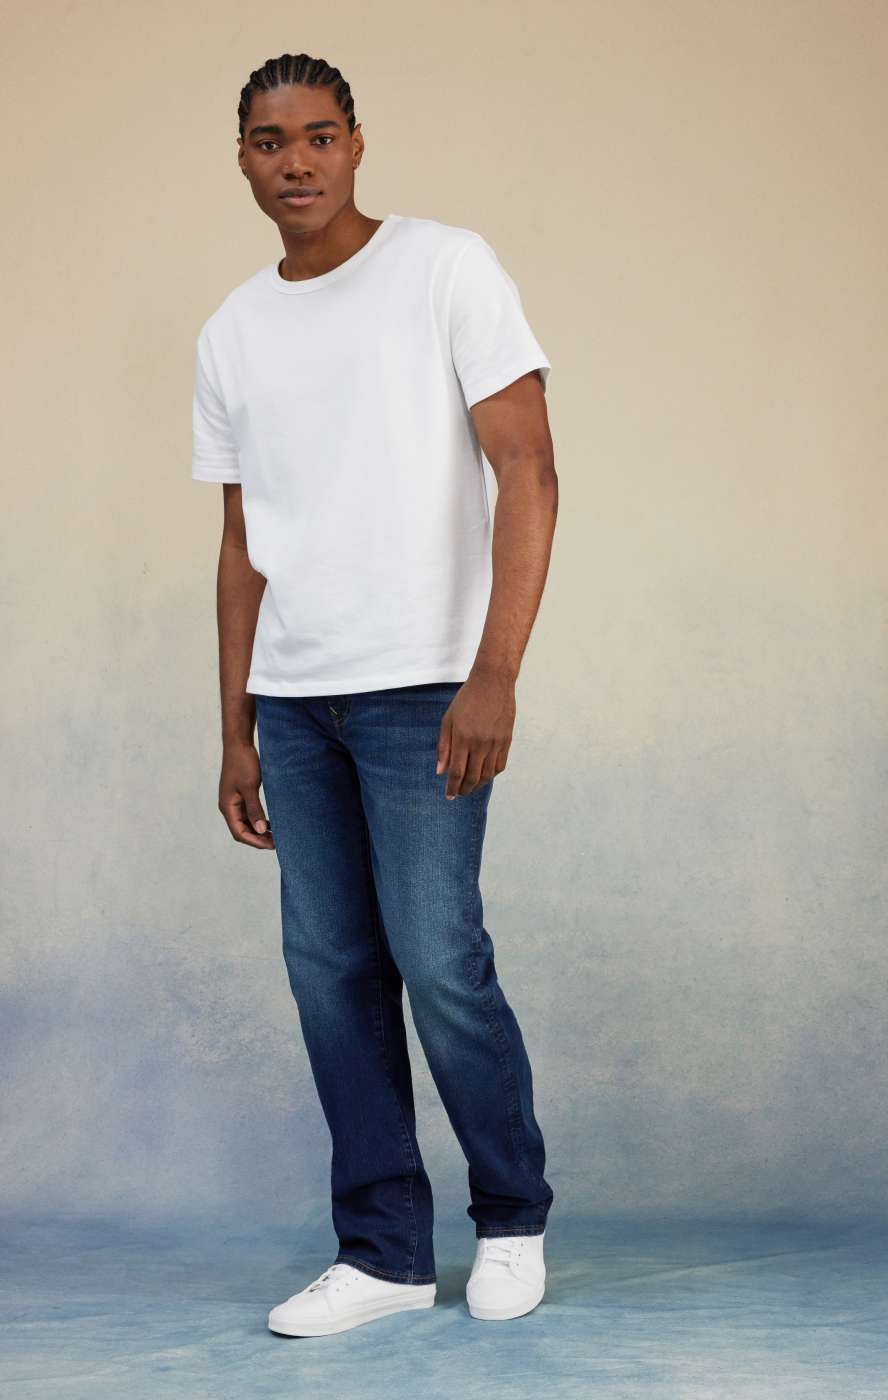 Men's Jeans: Jeans for Guys & Teens